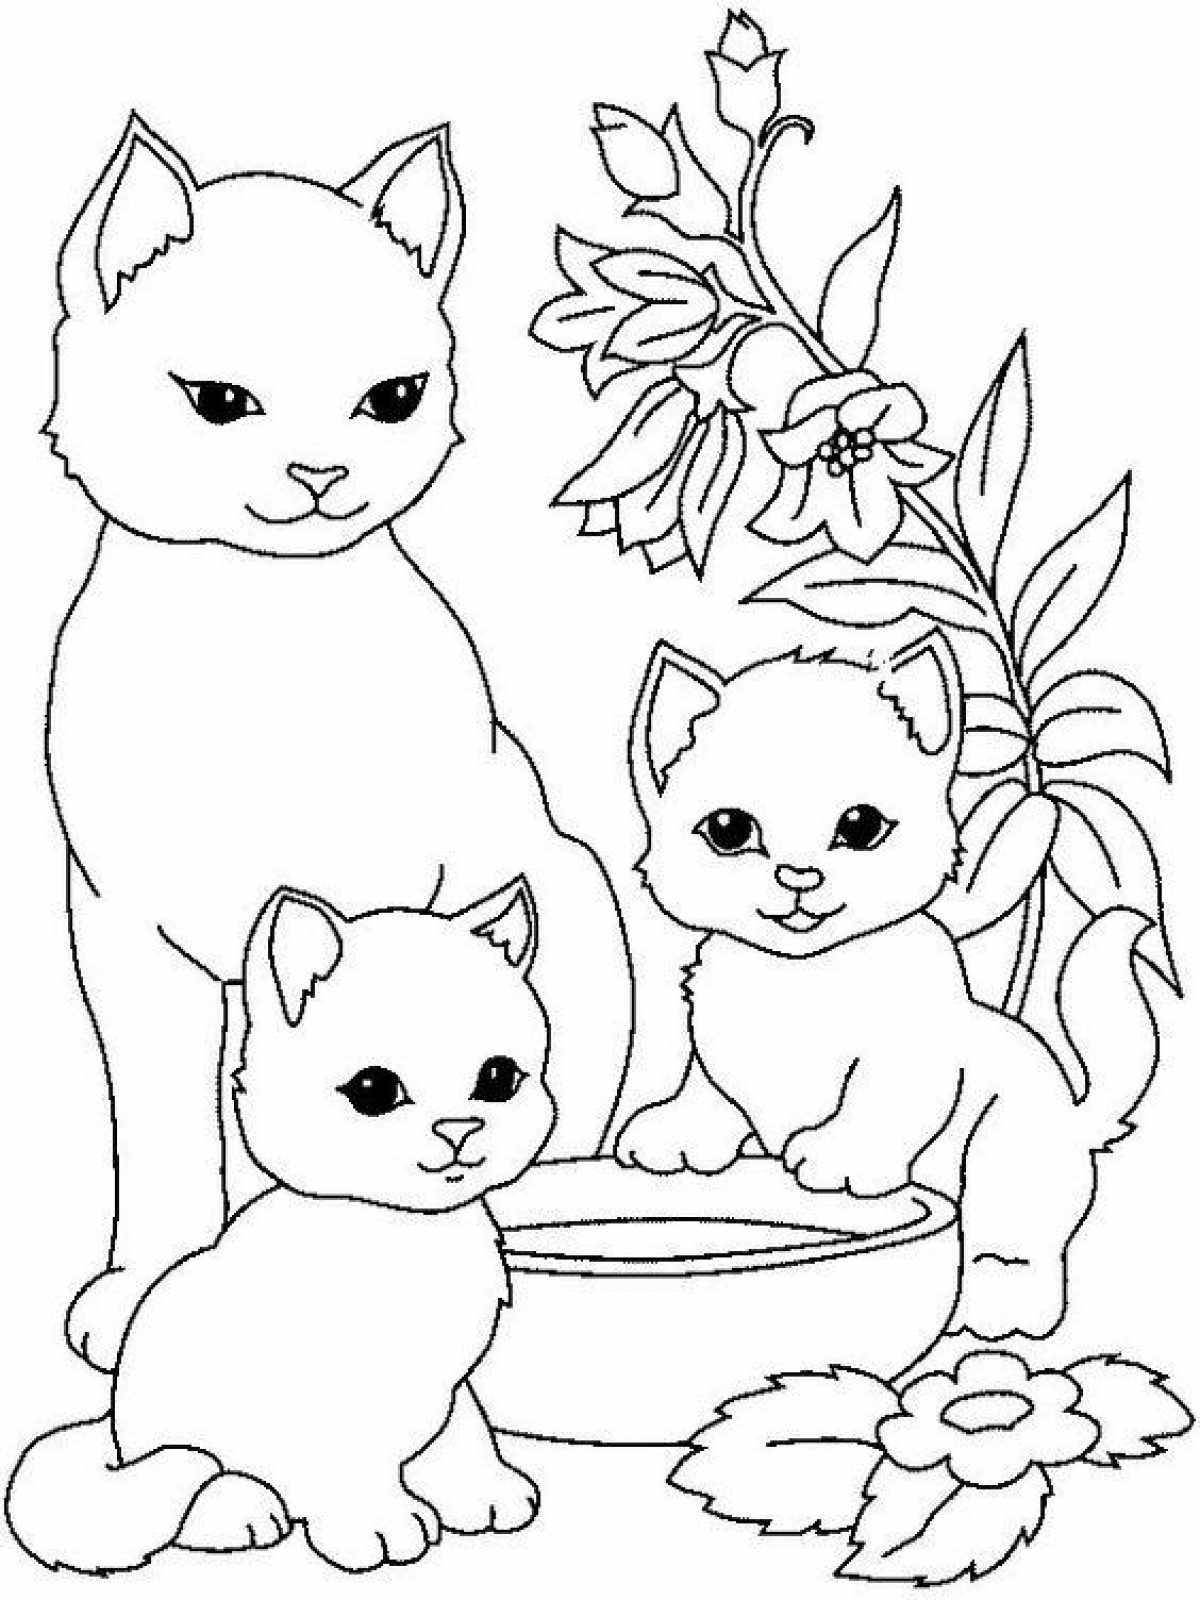 Coloring thigh for girls 7 years old cats